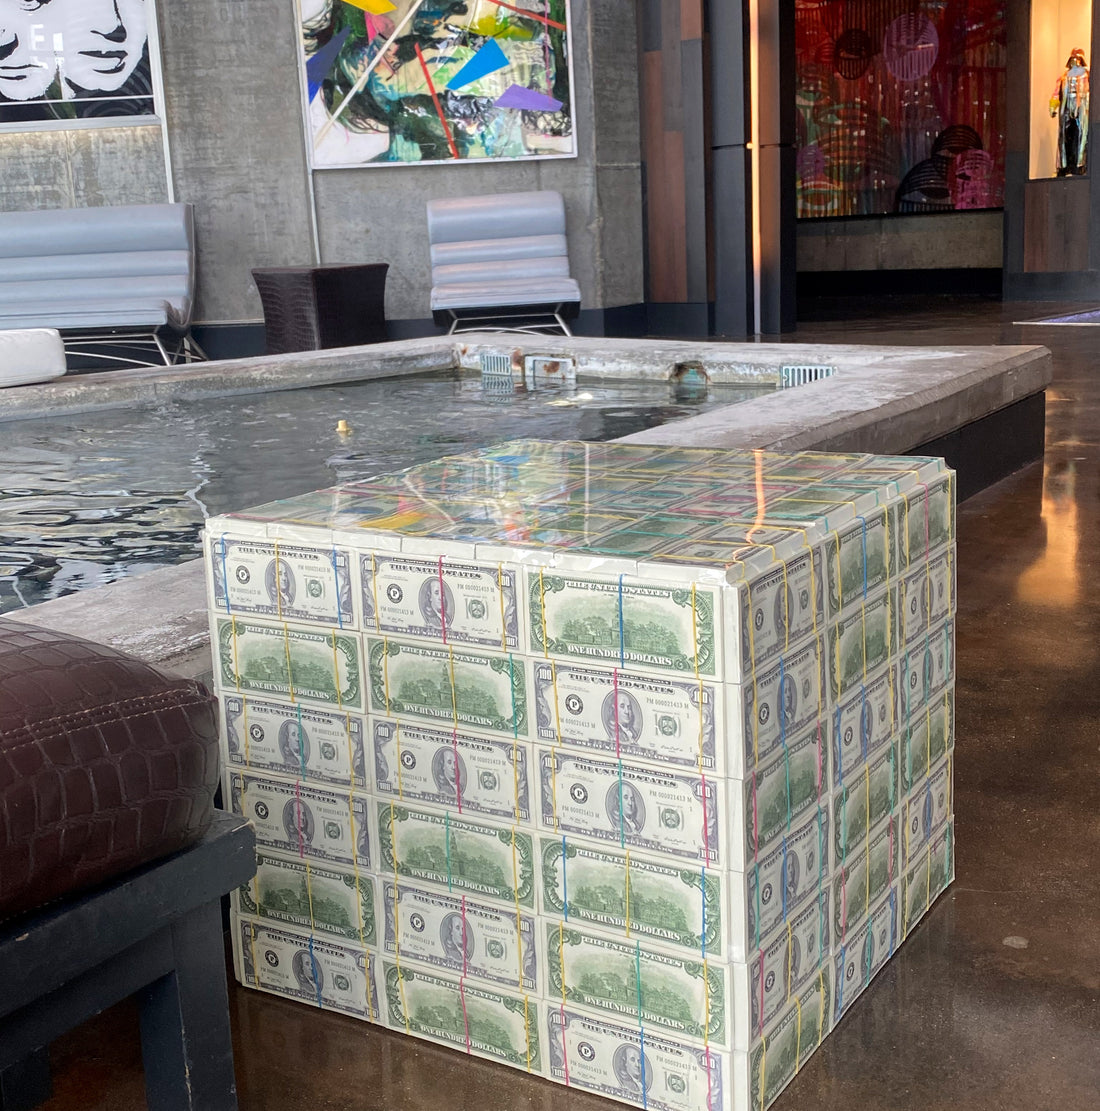 square money table style 1980s miami vice in Brickell luxury building 